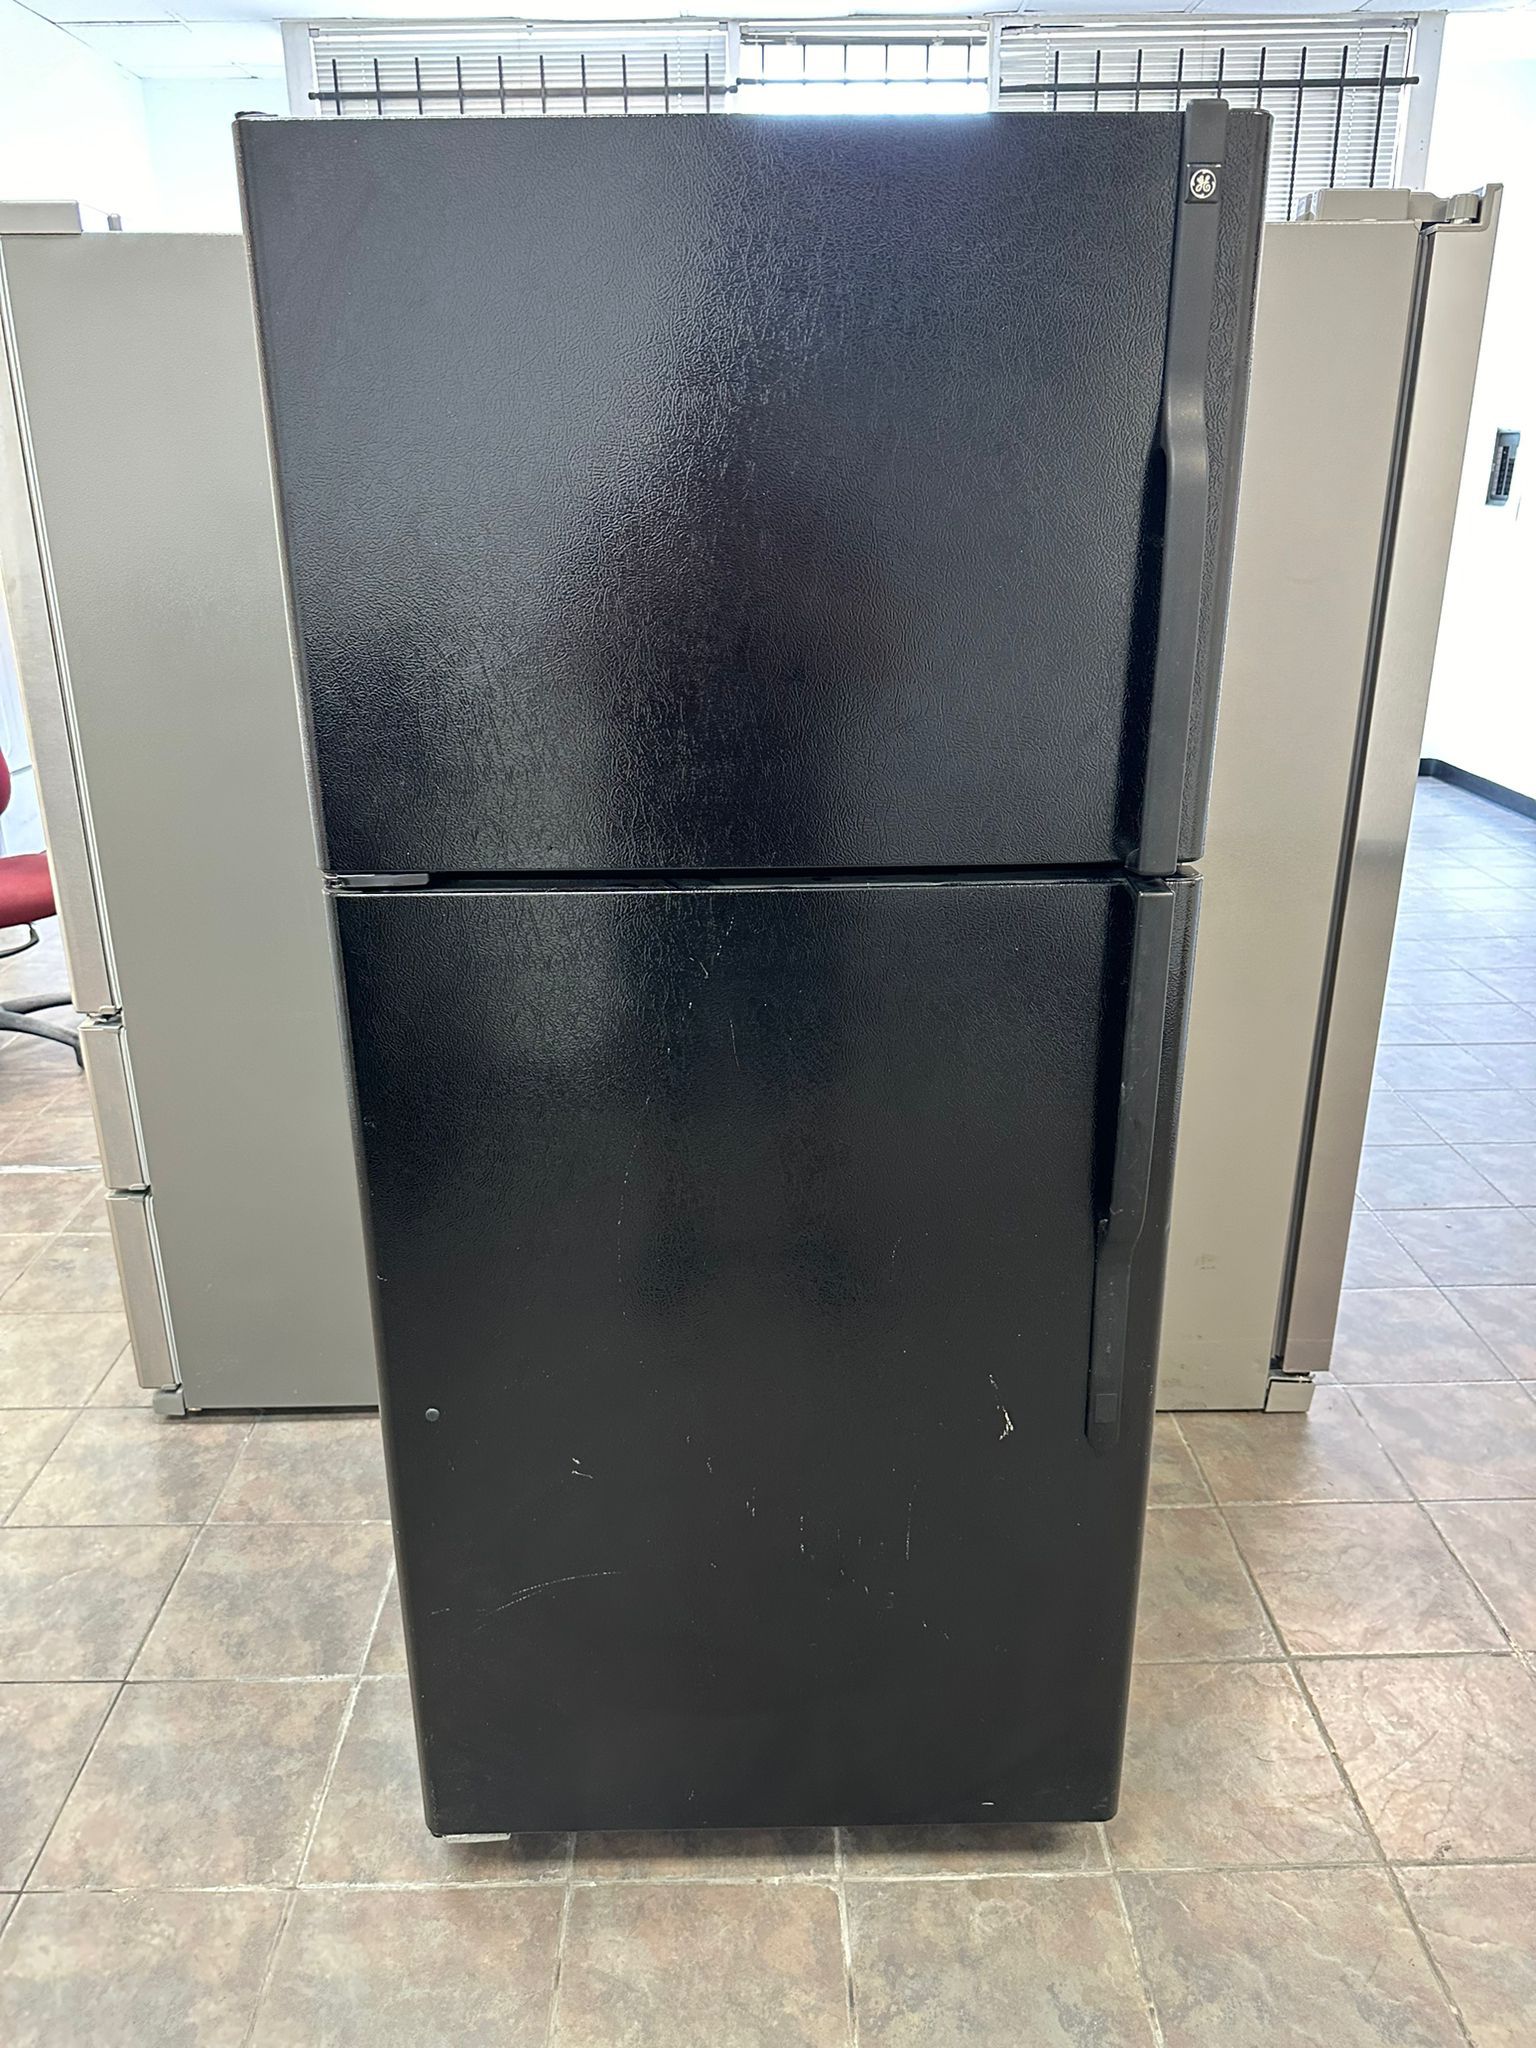 30 Inches Wide Top And Bottom GE Refrigerator 